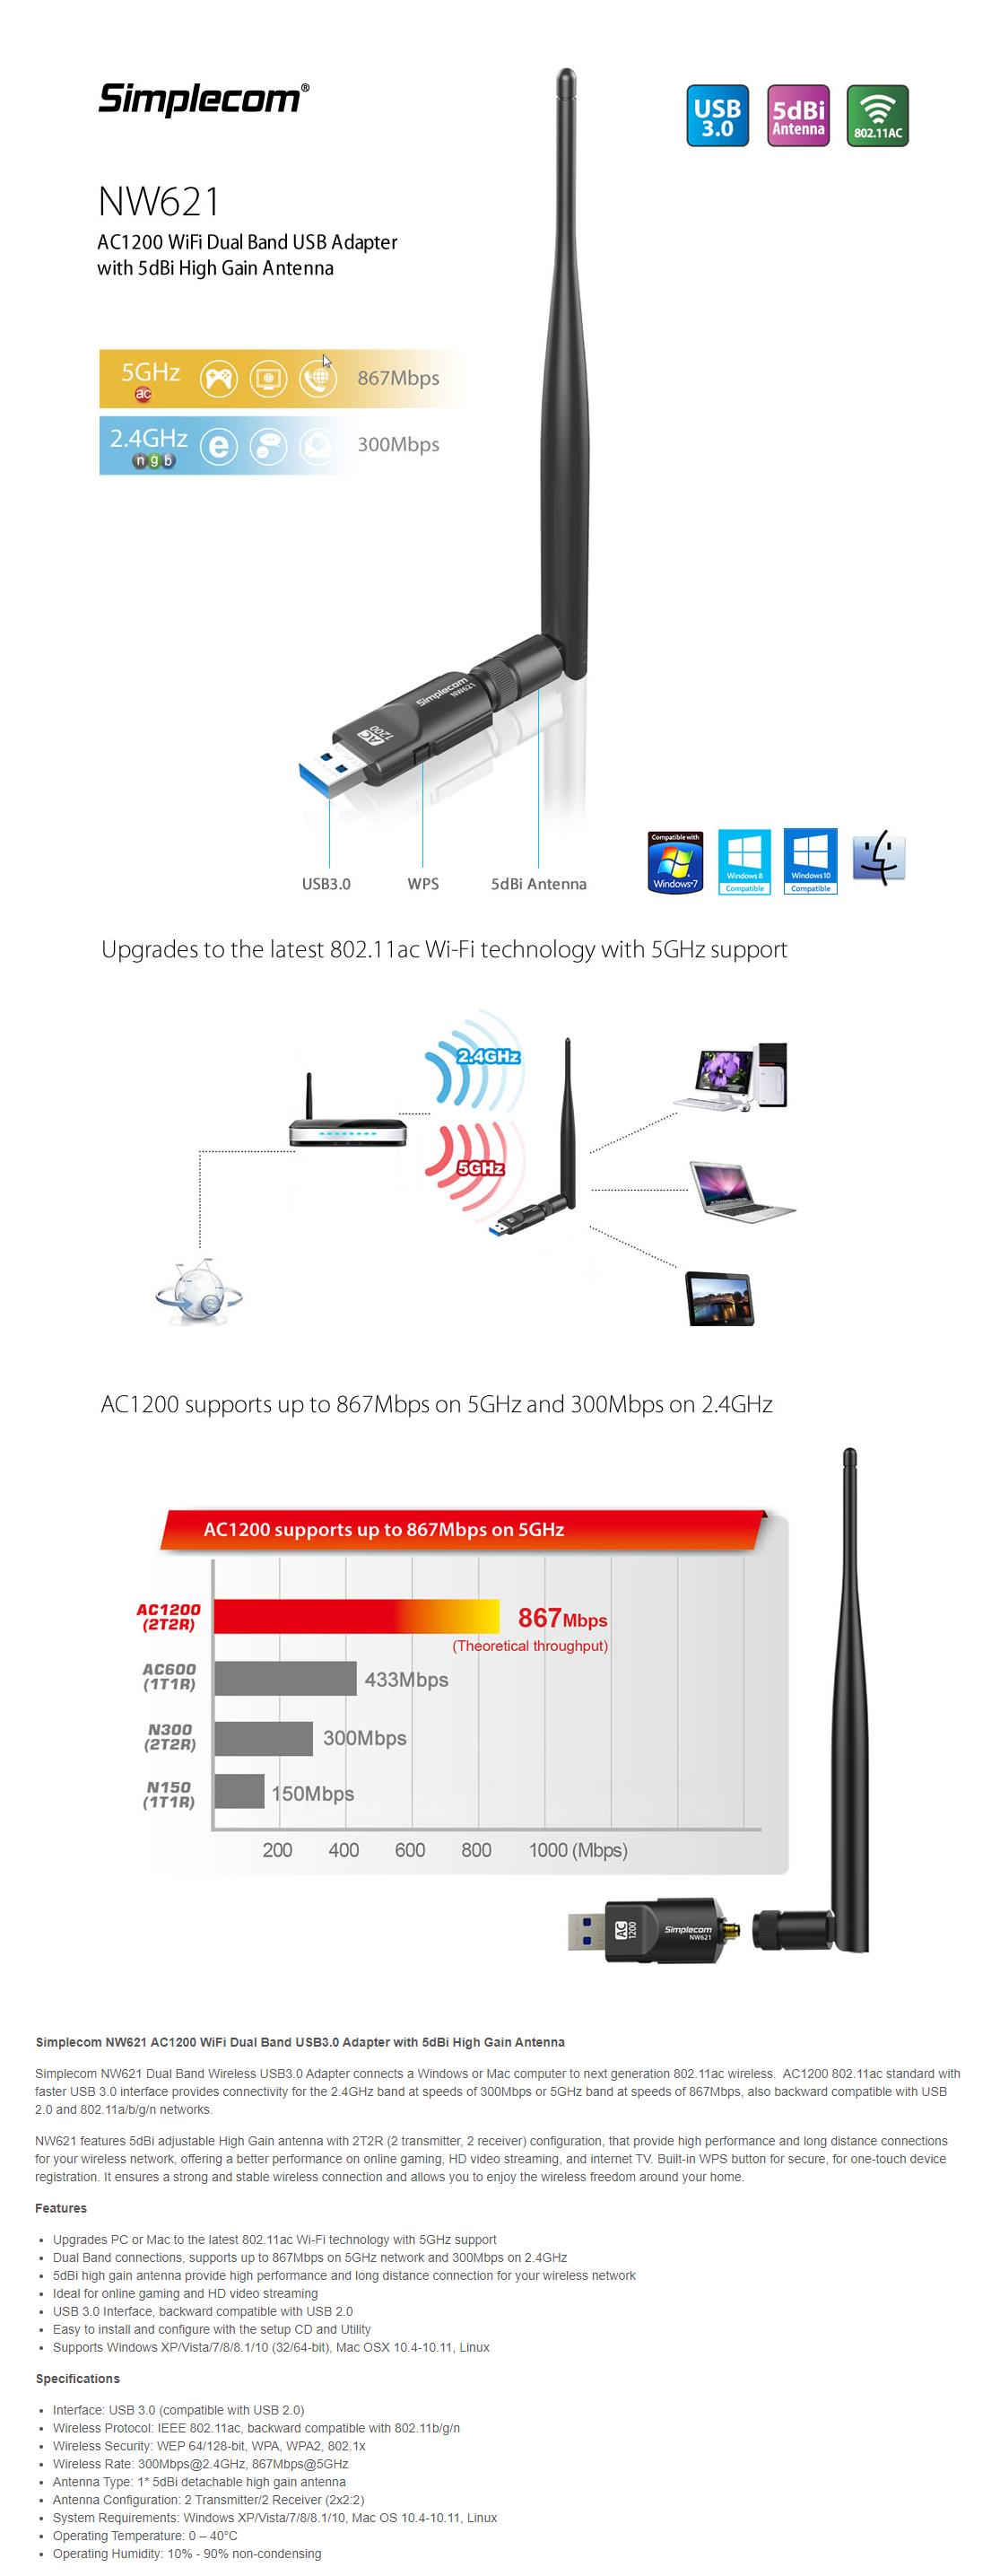 A large marketing image providing additional information about the product Simplecom NW621 AC1200 Dual-Band USB Wifi Adapter with 5dBi High Gain Antenna - Additional alt info not provided